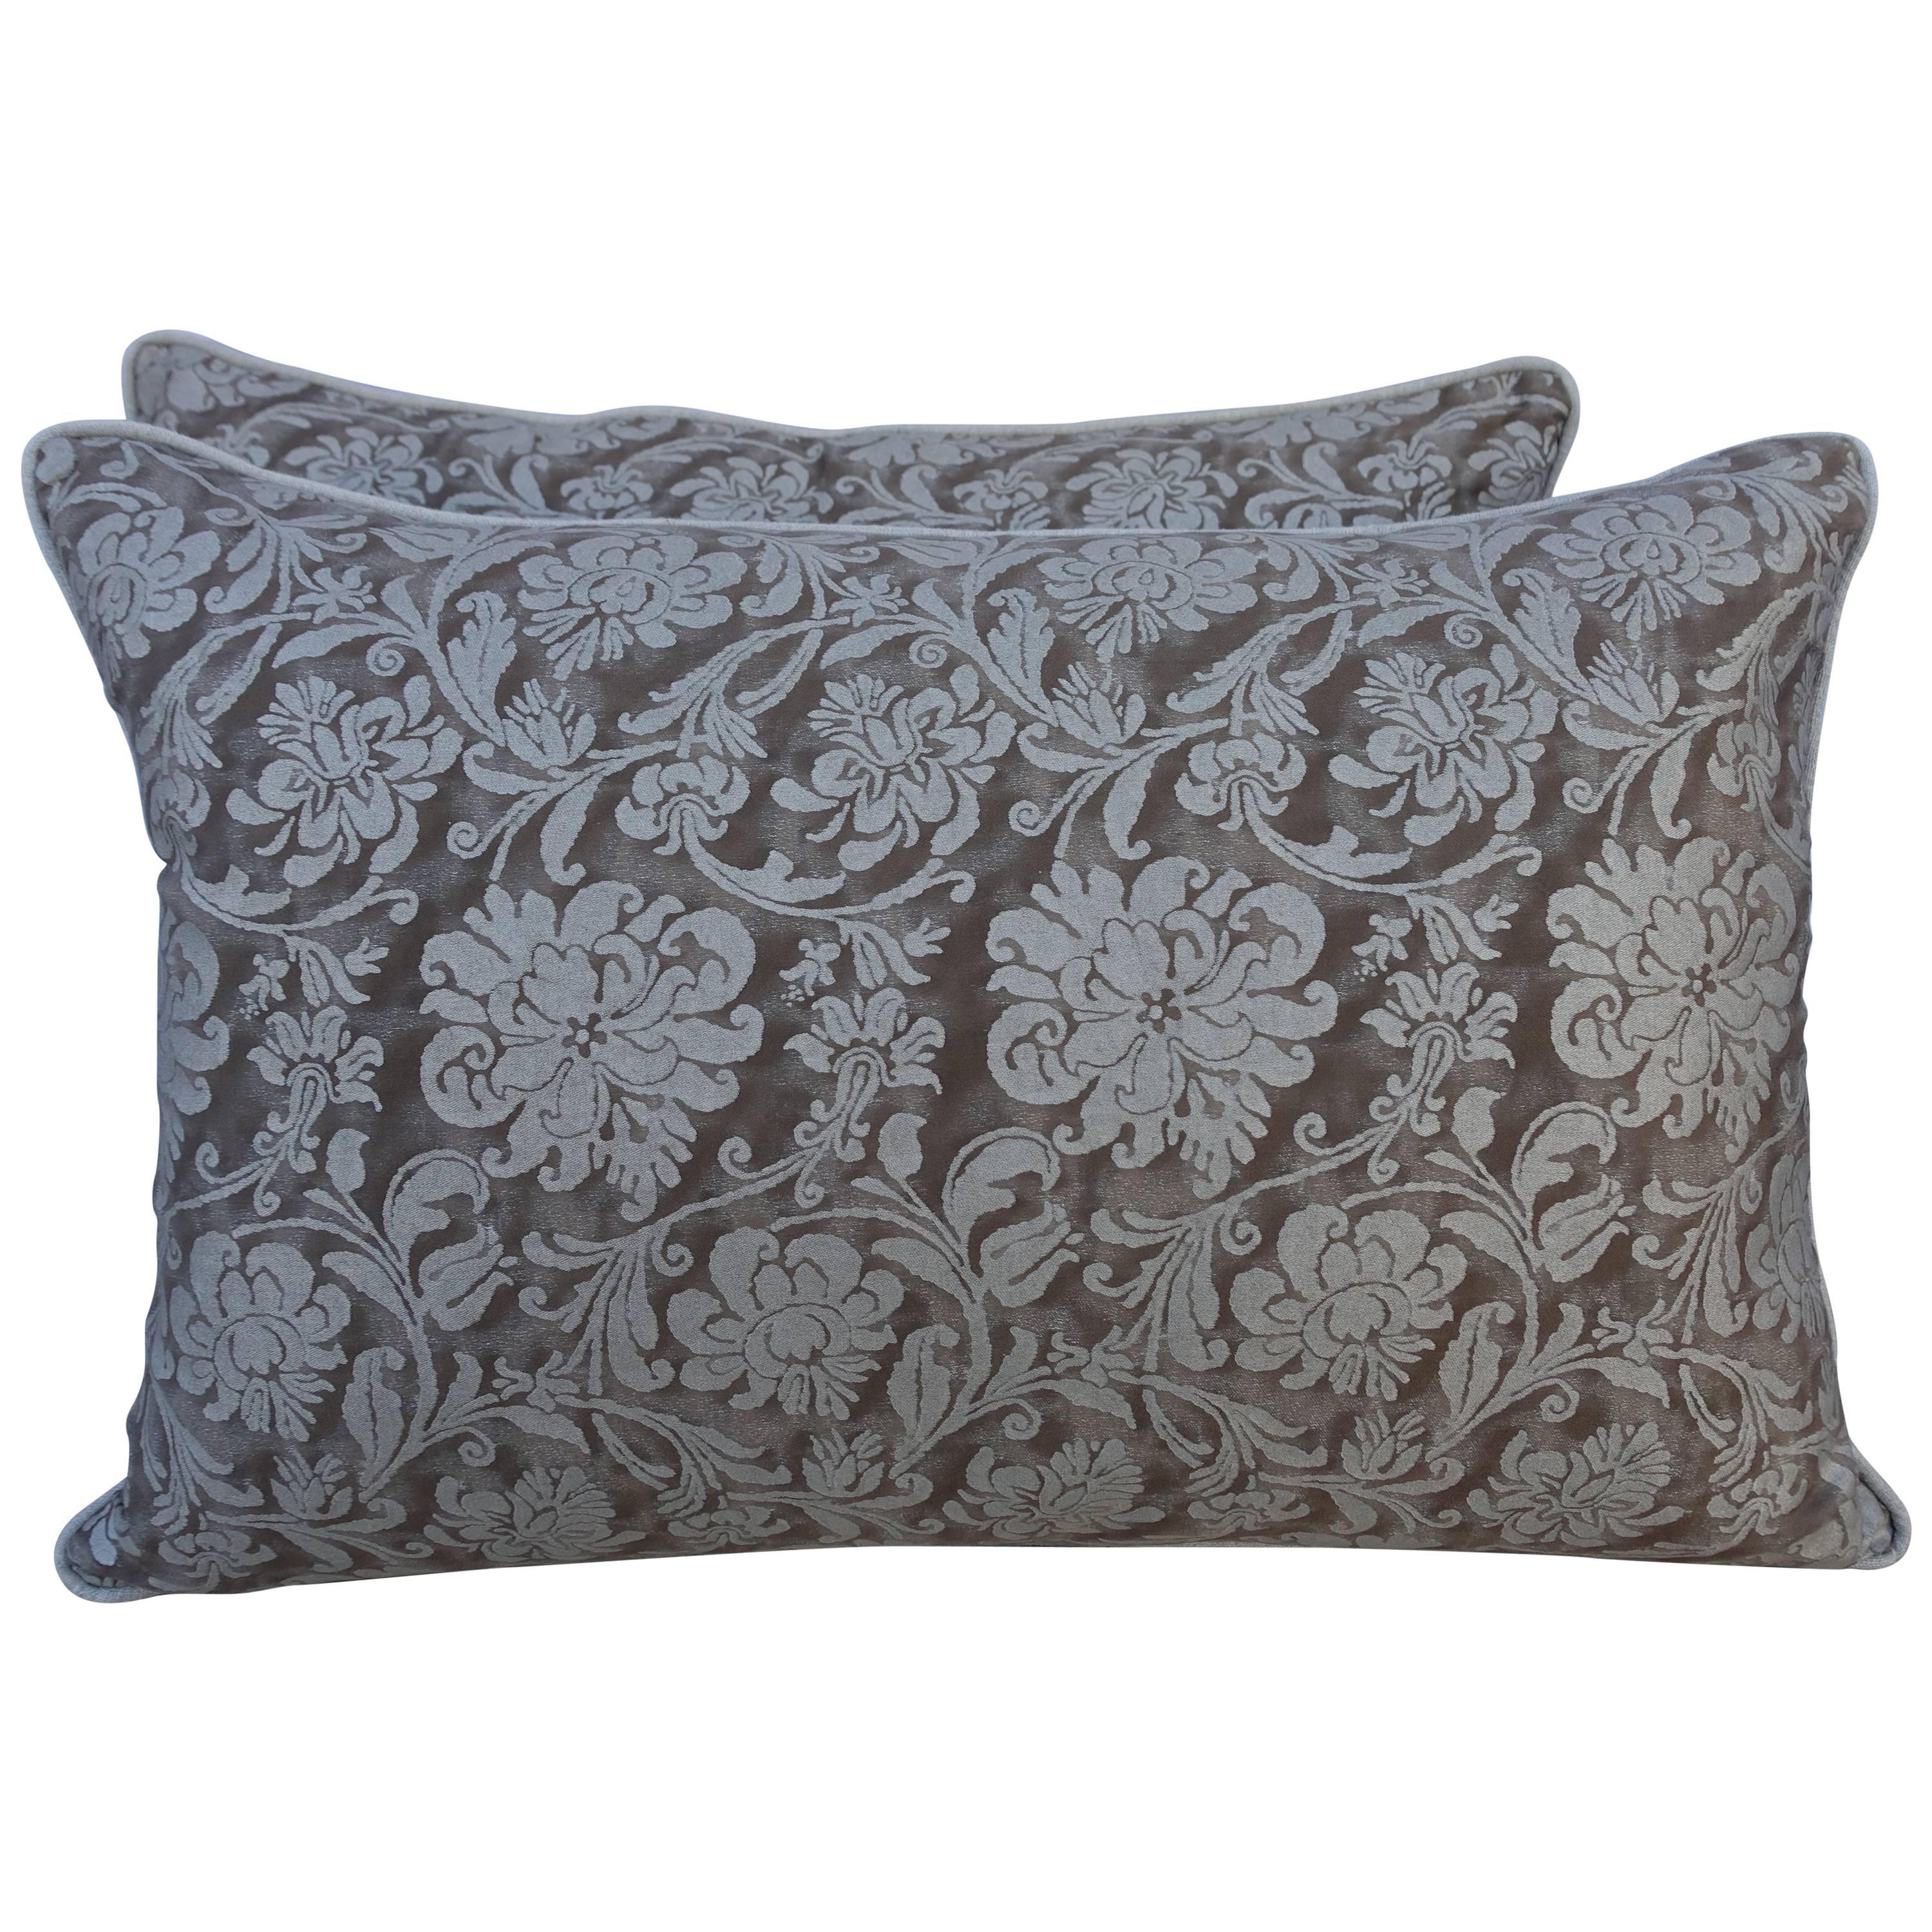 Pair of Cimarosa Patterned Greyish Brown and Silvery Gold Fortuny Pillows